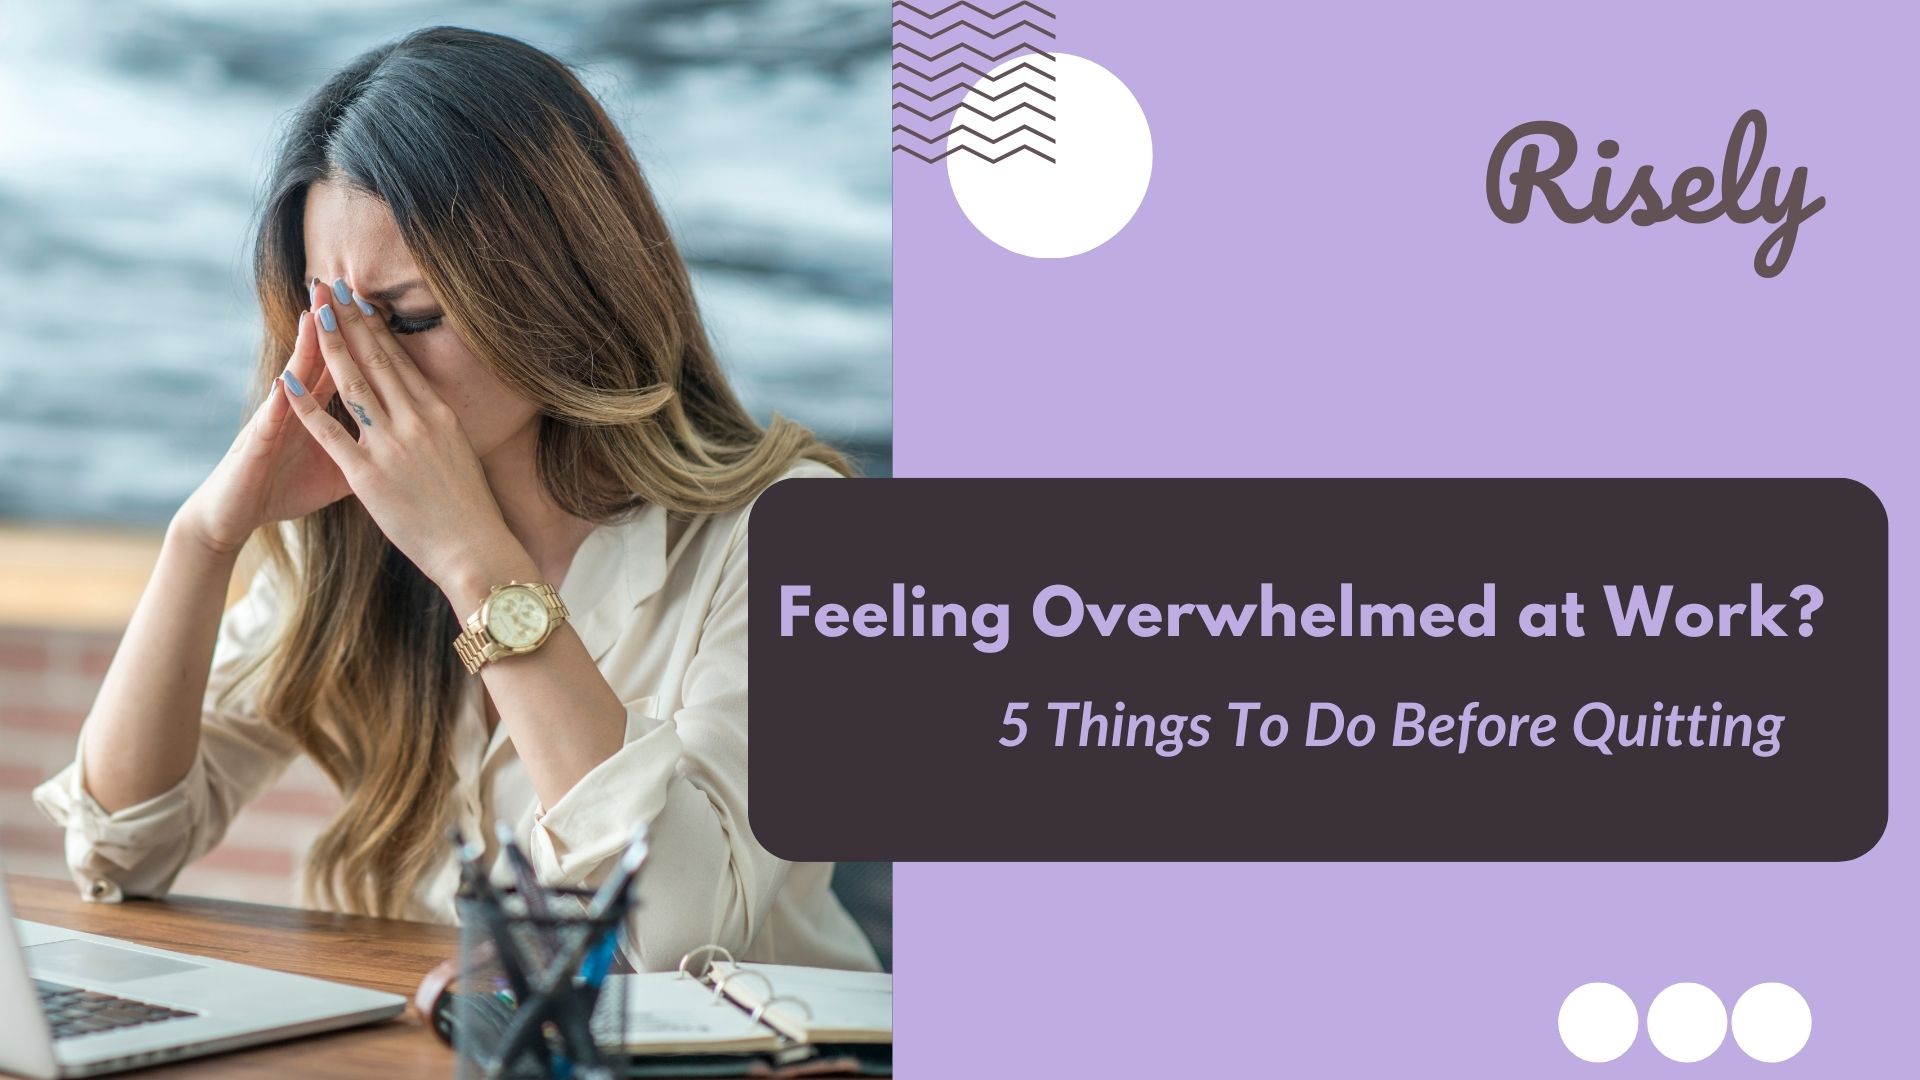 Feeling Overwhelmed at Work? 5 Things To Do Before Quitting